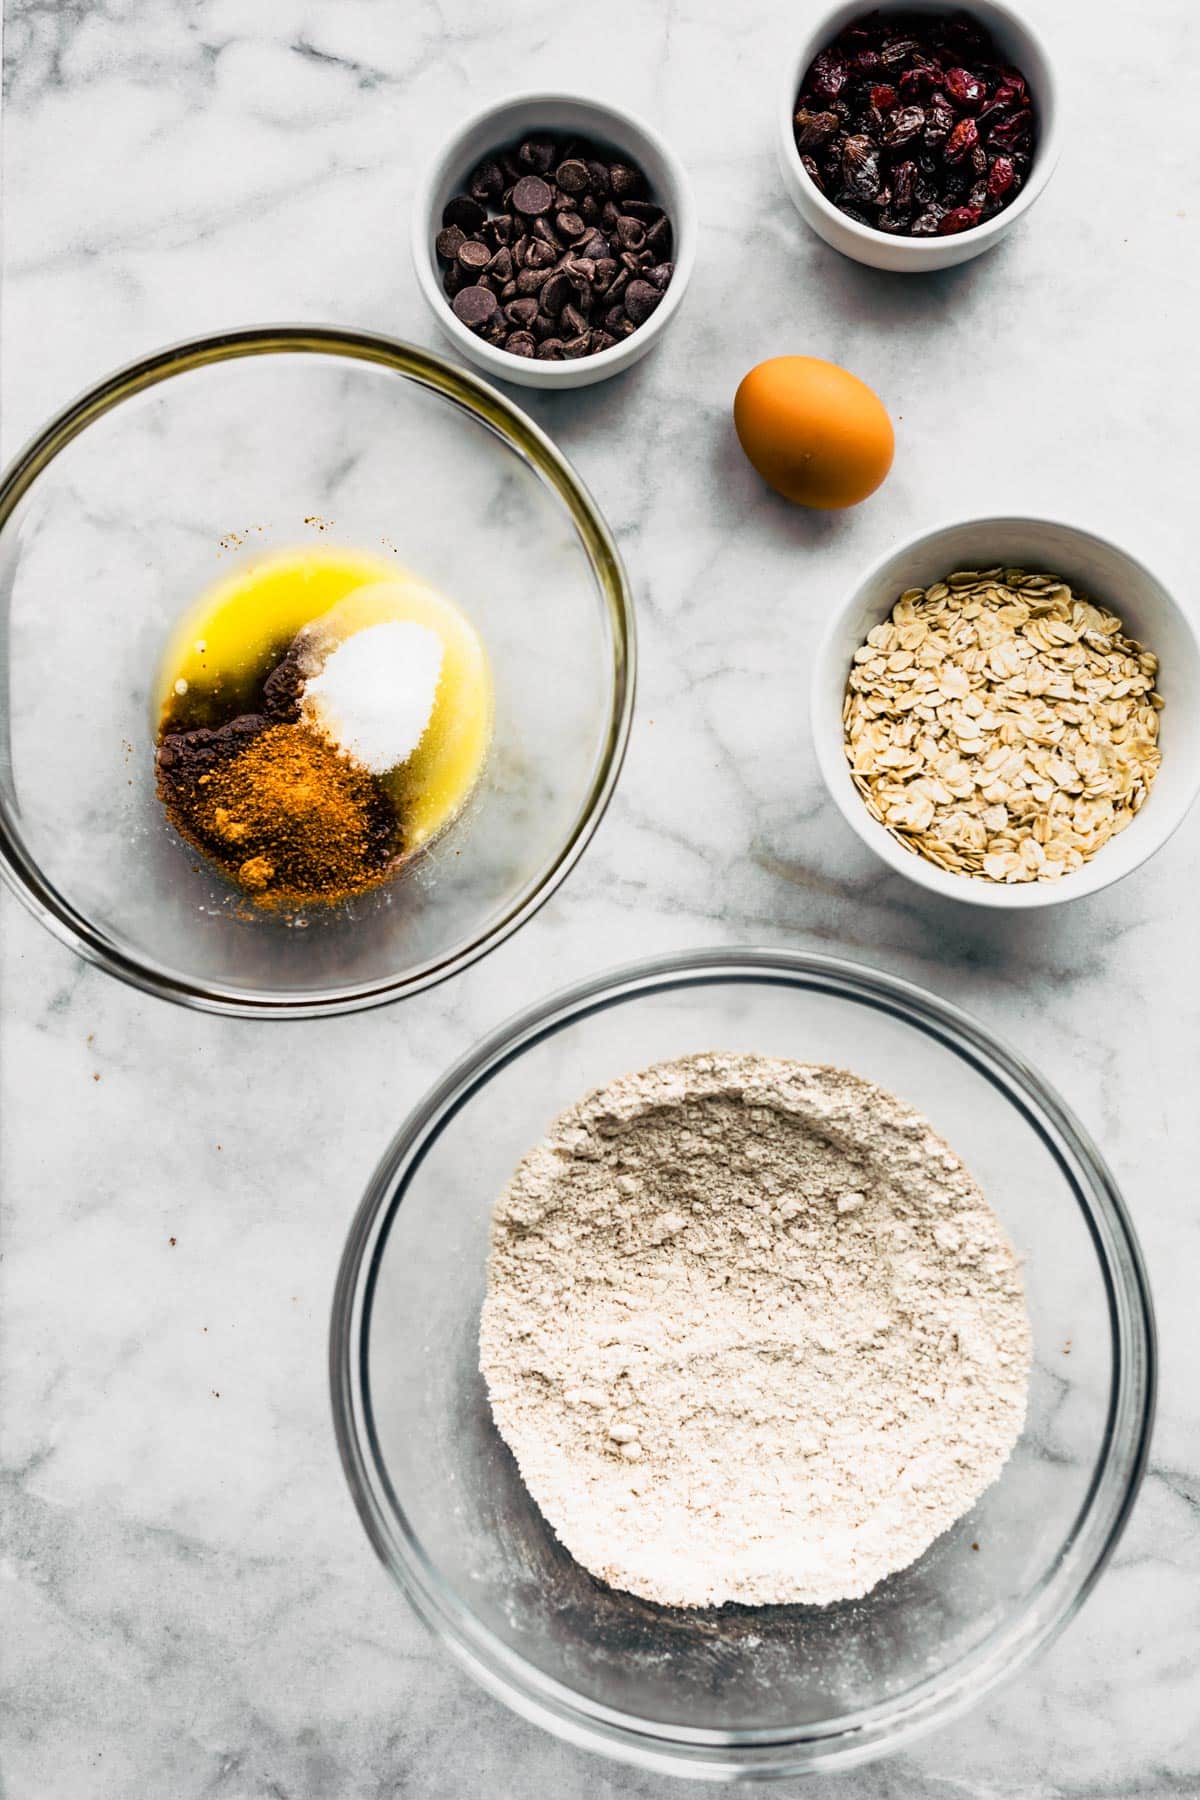 Bowls of ingredients for gluten free oatmeal cookies on a white marble countertop.